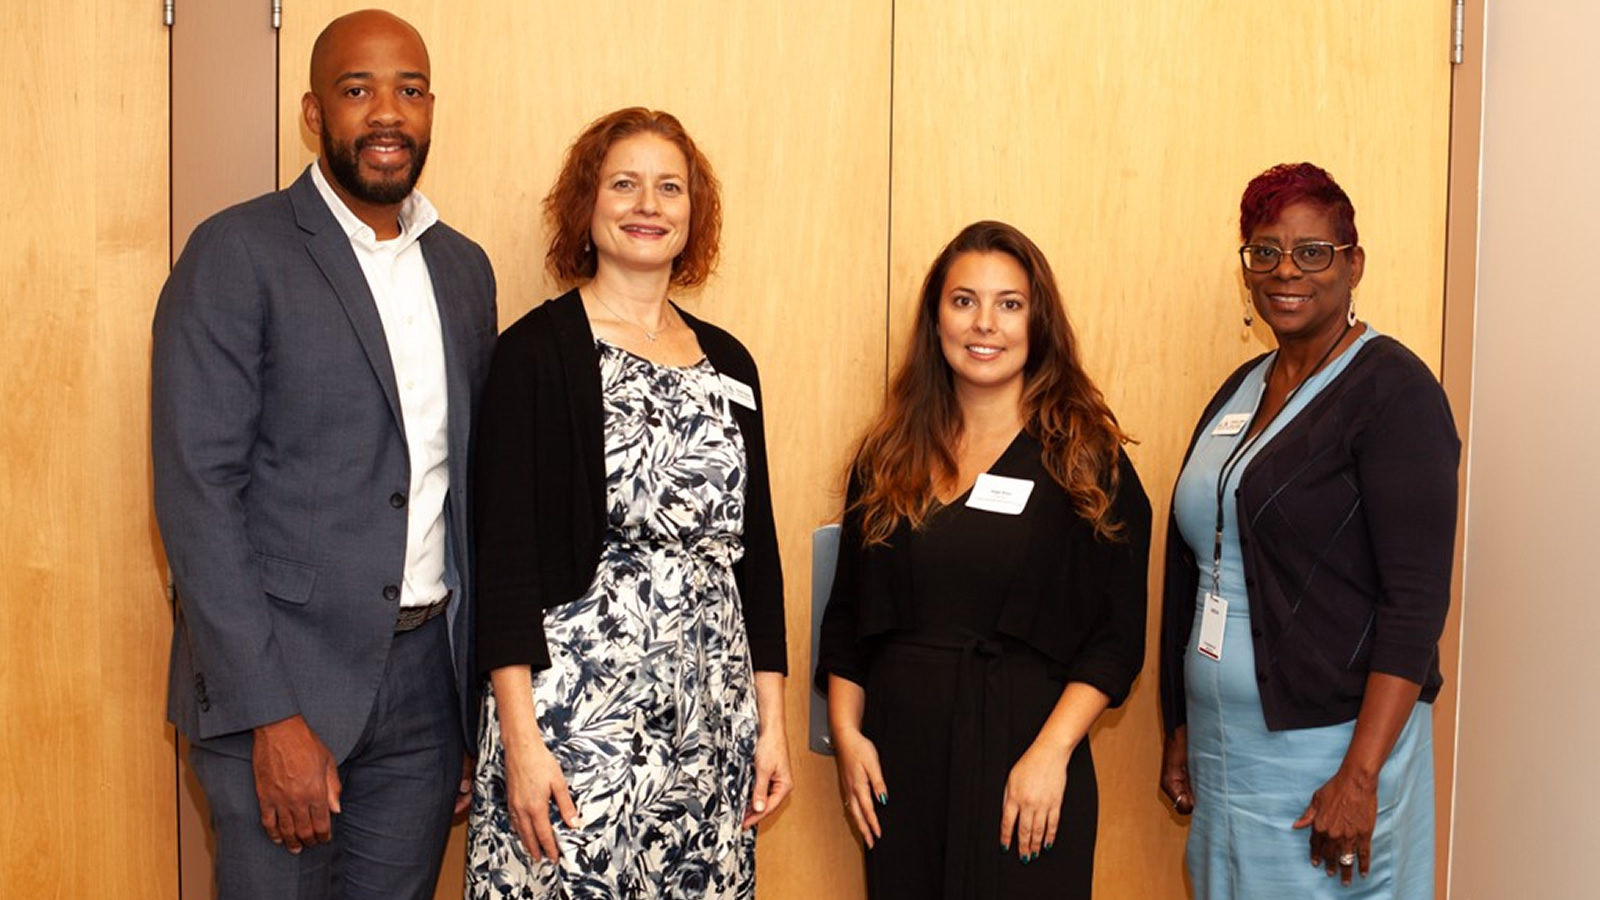 Photo taken at Bank On Greater Milwaukee Local Launch Event on 9/19/2019. Pictured from left: Mandela Barnes, Lt. Governor of the State of Wisconsin; Kristi Luzar, Executive Director, Urban Economic Development Association of Wisconsin; Paige Diner, Cities for Financial Empowerment Fund; Constance Alberts, Bank On Greater Milwaukee. Photo Credit: Tonda Thompson of Vogue Dreams